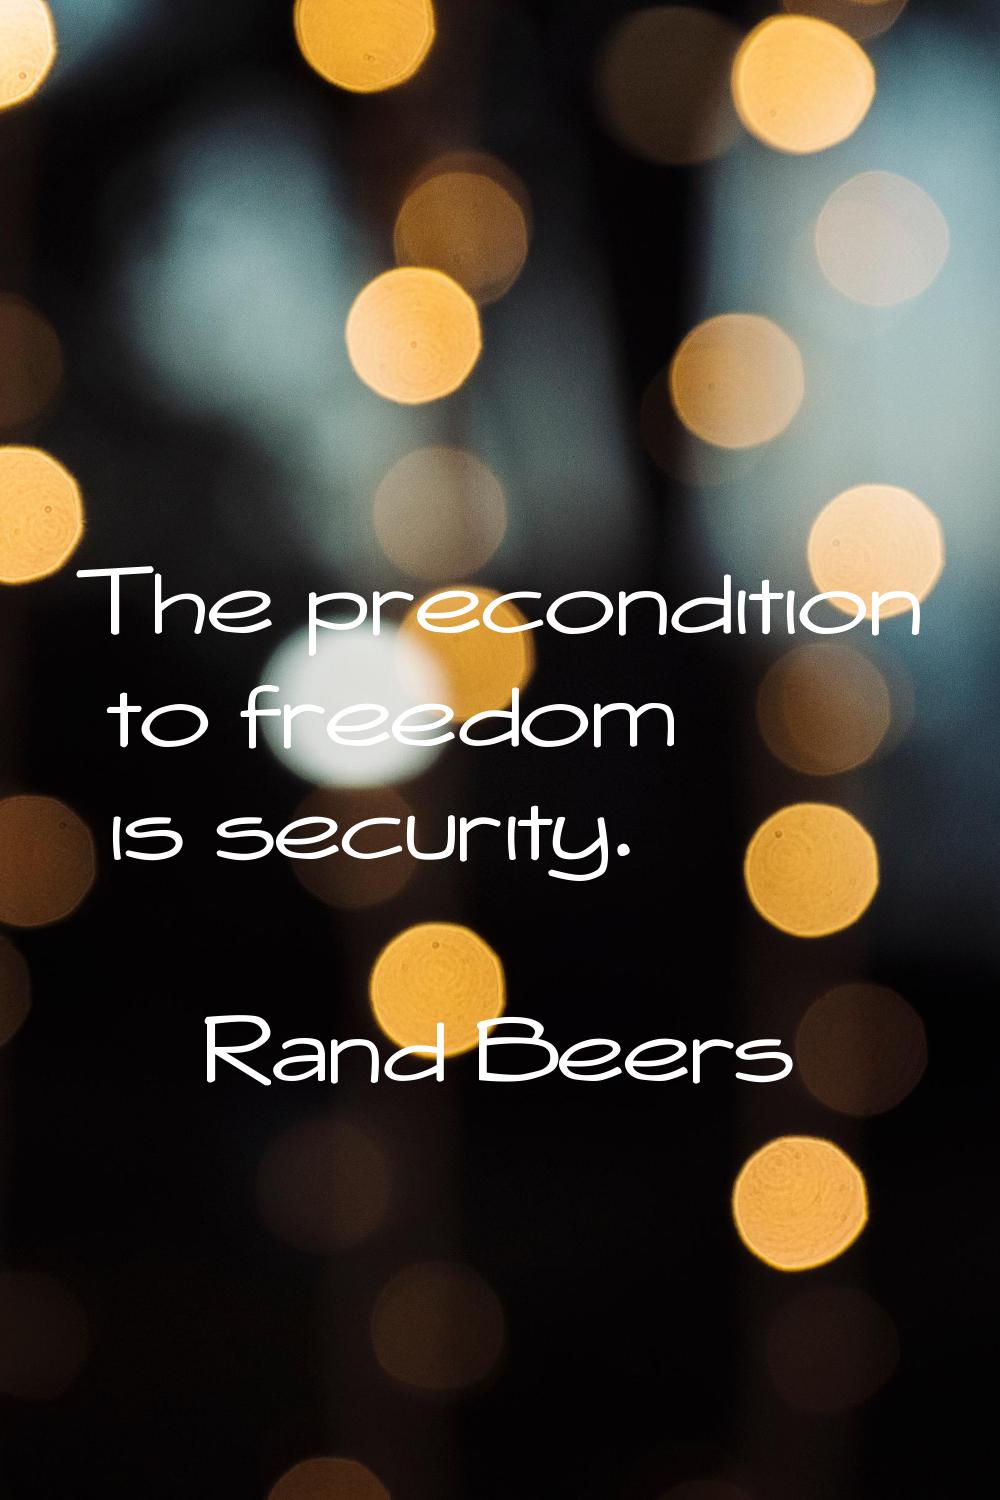 The precondition to freedom is security.